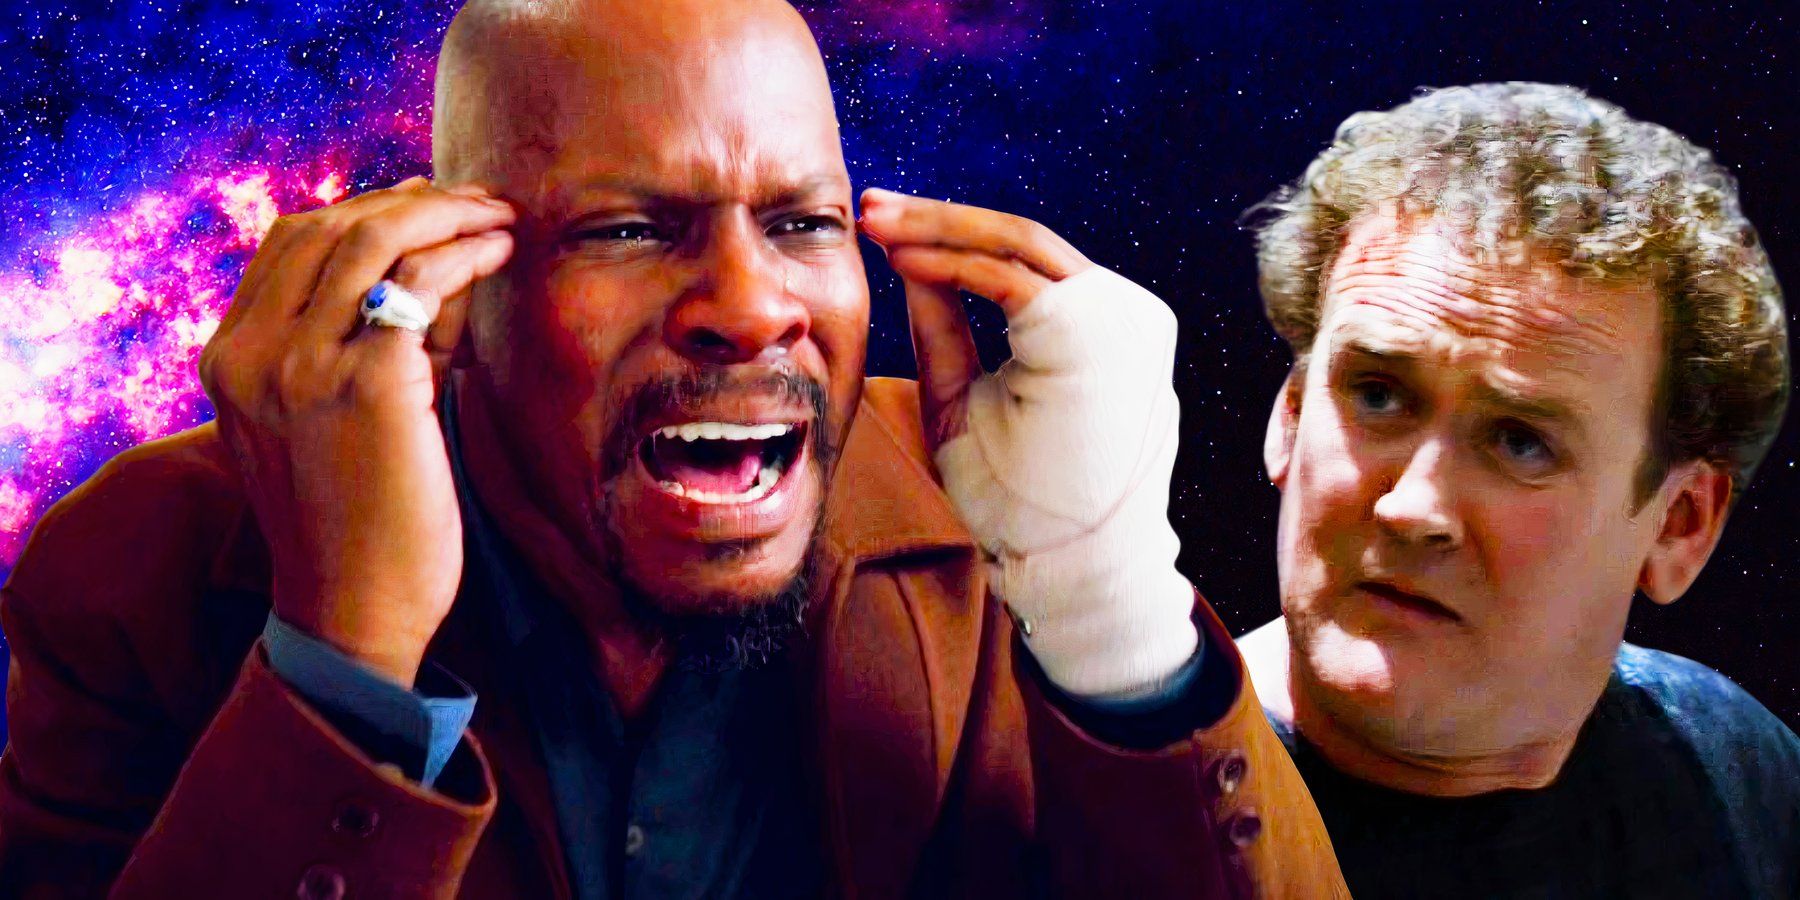 Avery Brooks as Benni Russell and Colm Meaney as Chief O'Brien, both looking distraught in Star Trek: DS9